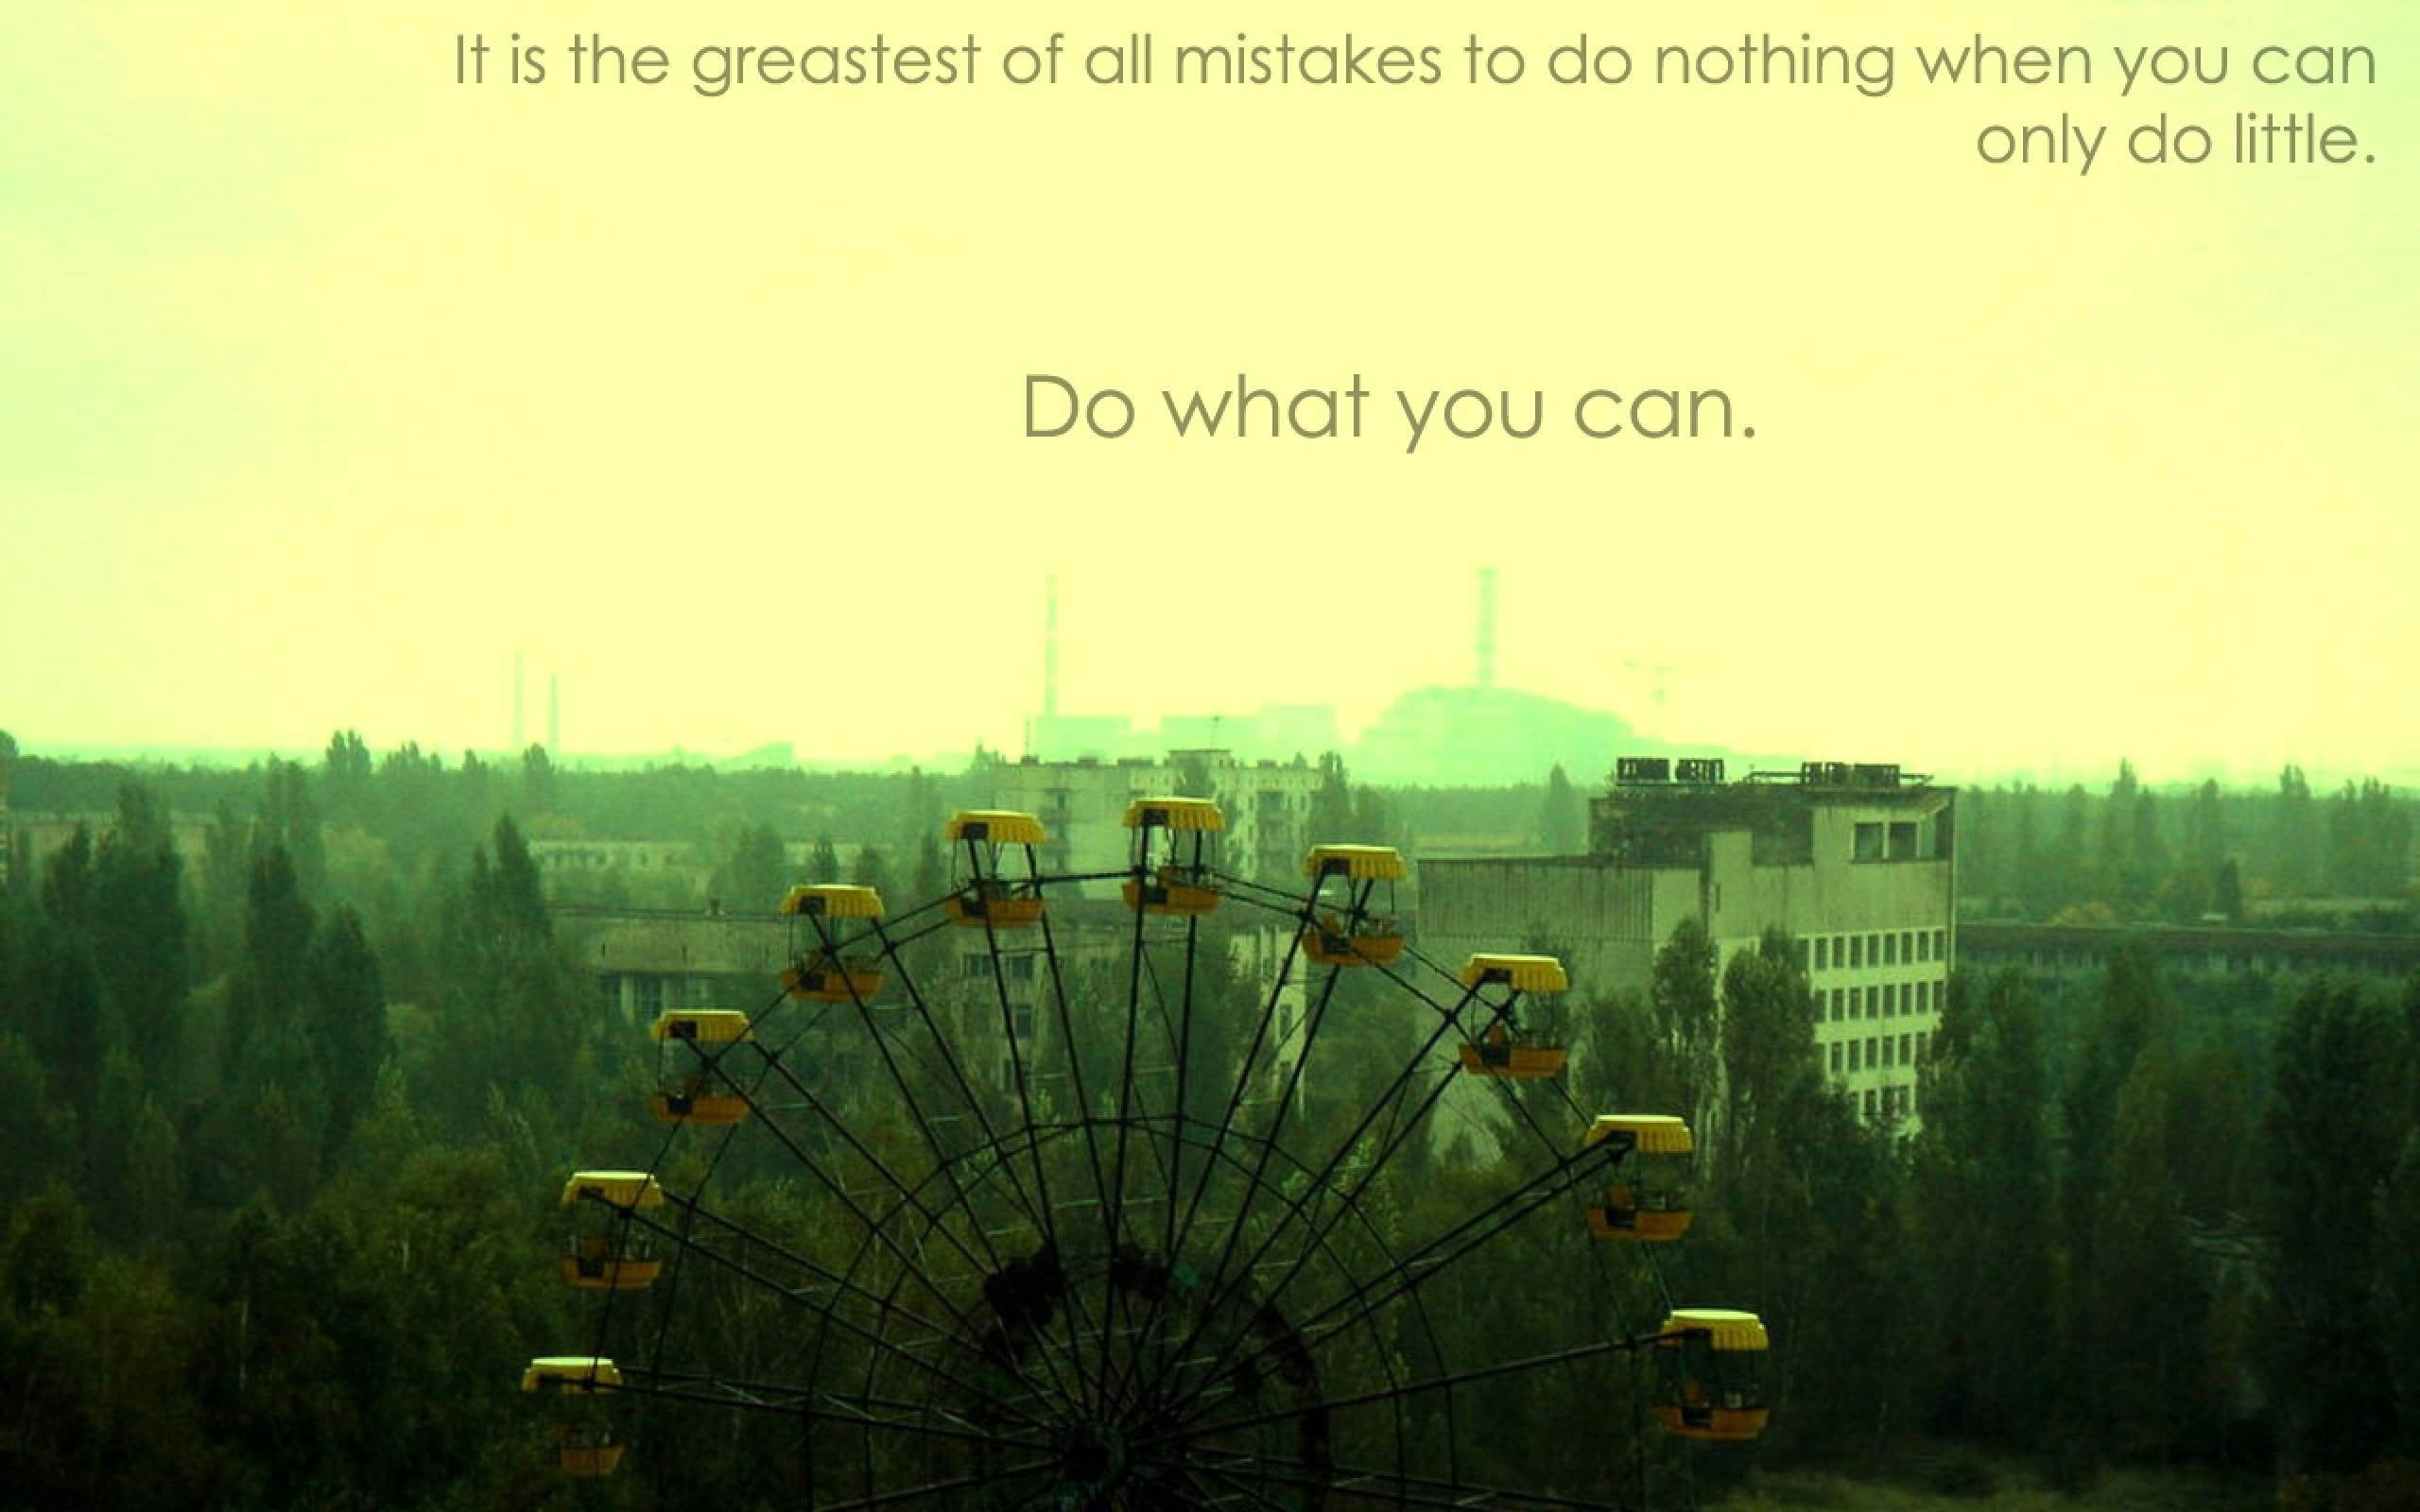 Wallpaper Ferris Wheel With Text Overlay, Chernobyl, Quote